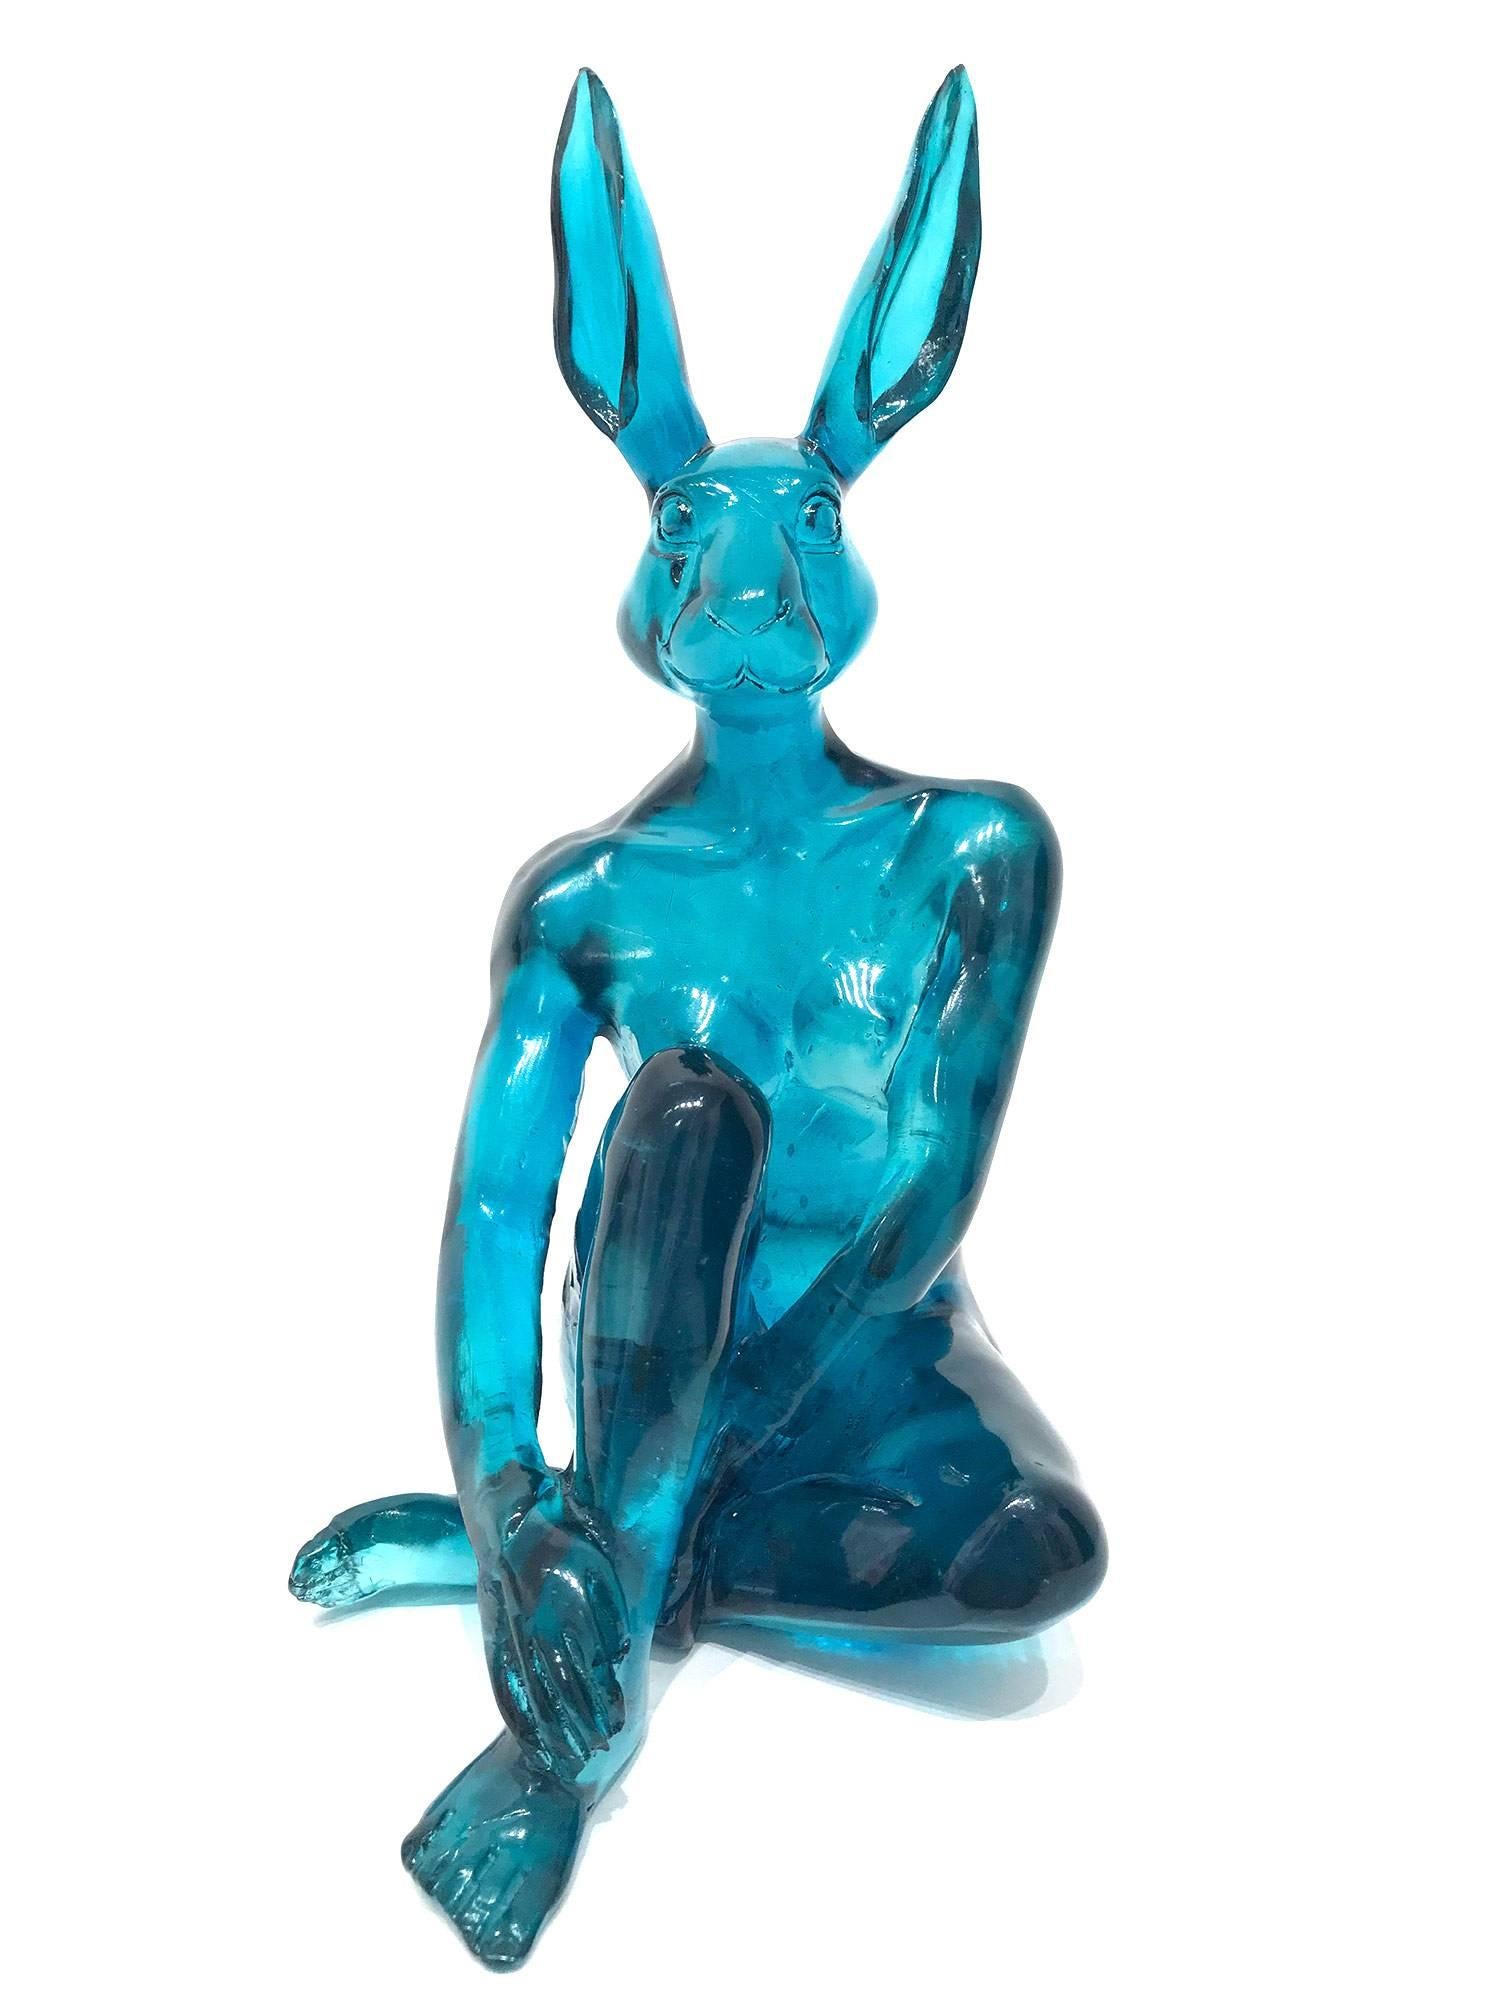 Mini Lolly Rabbitgirl (Blue) - Sculpture by Gillie and Marc Schattner